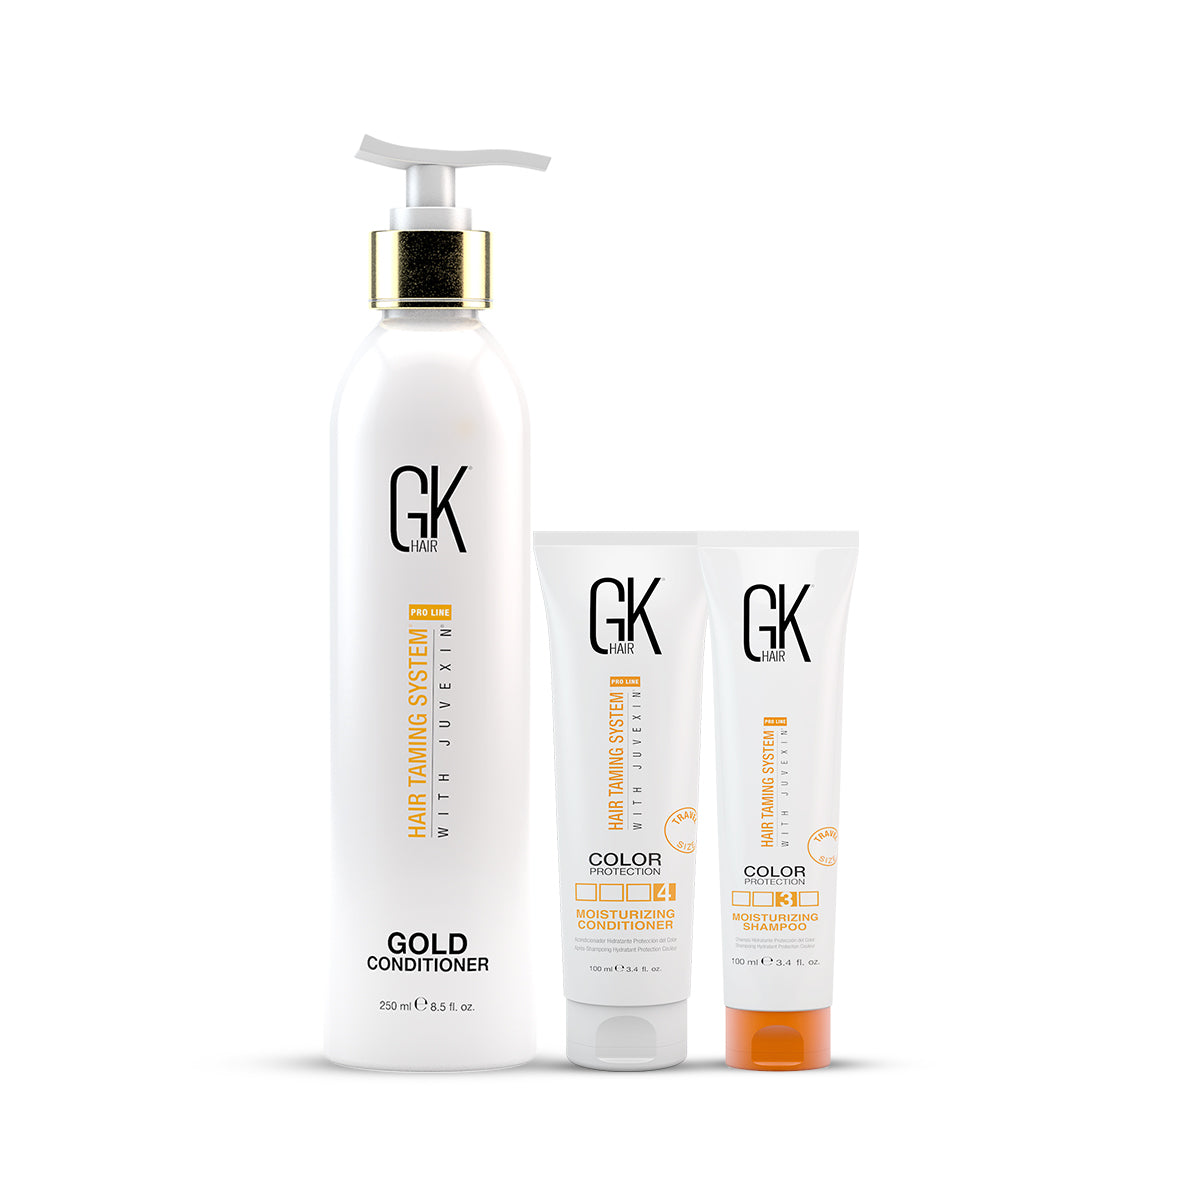 GK Hair Moisturizing Shampoo and Conditioner 100 Ml with Gold Conditioner 250 Ml